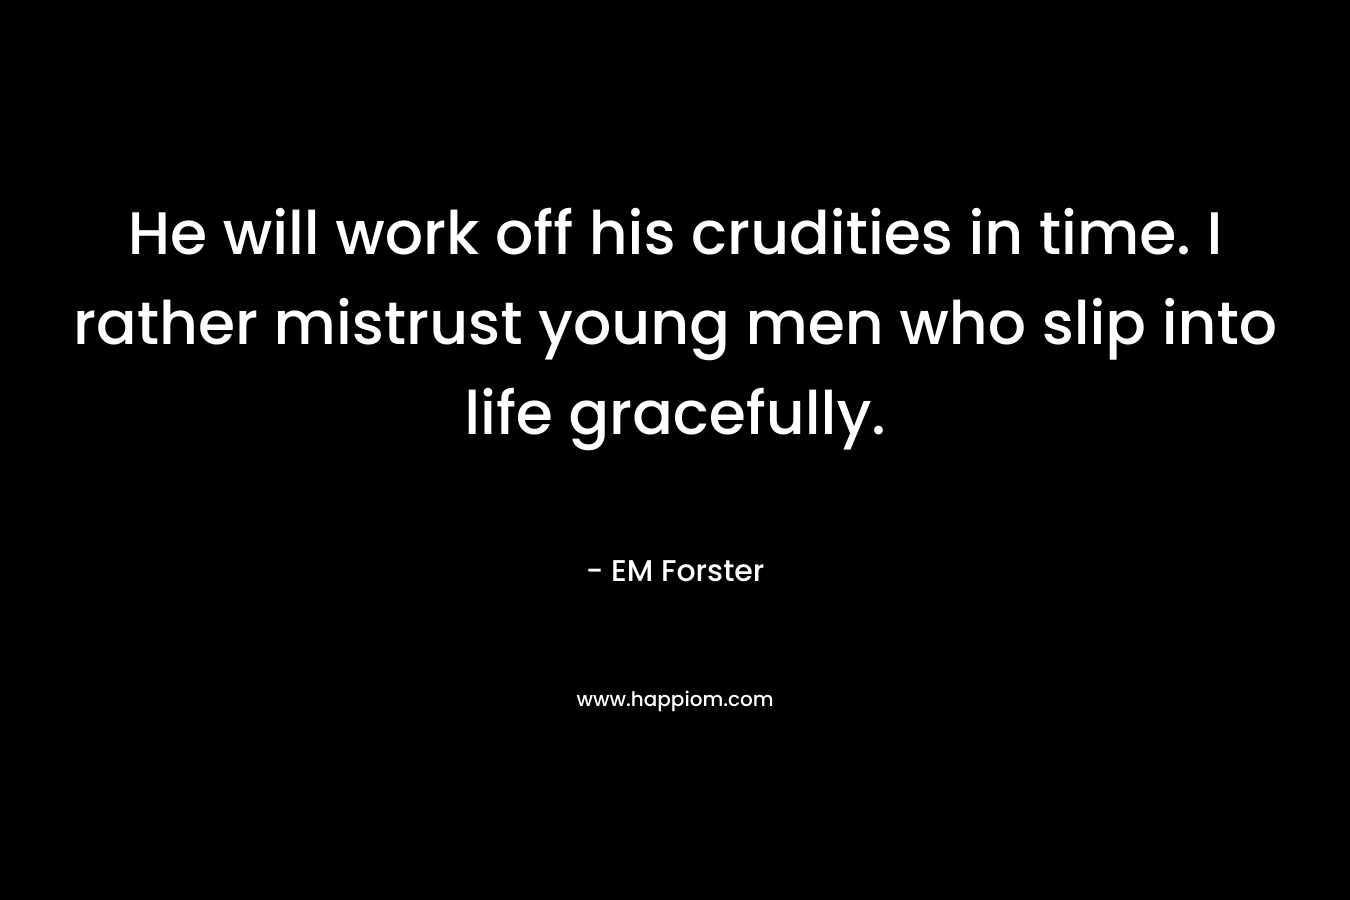 He will work off his crudities in time. I rather mistrust young men who slip into life gracefully. – EM Forster